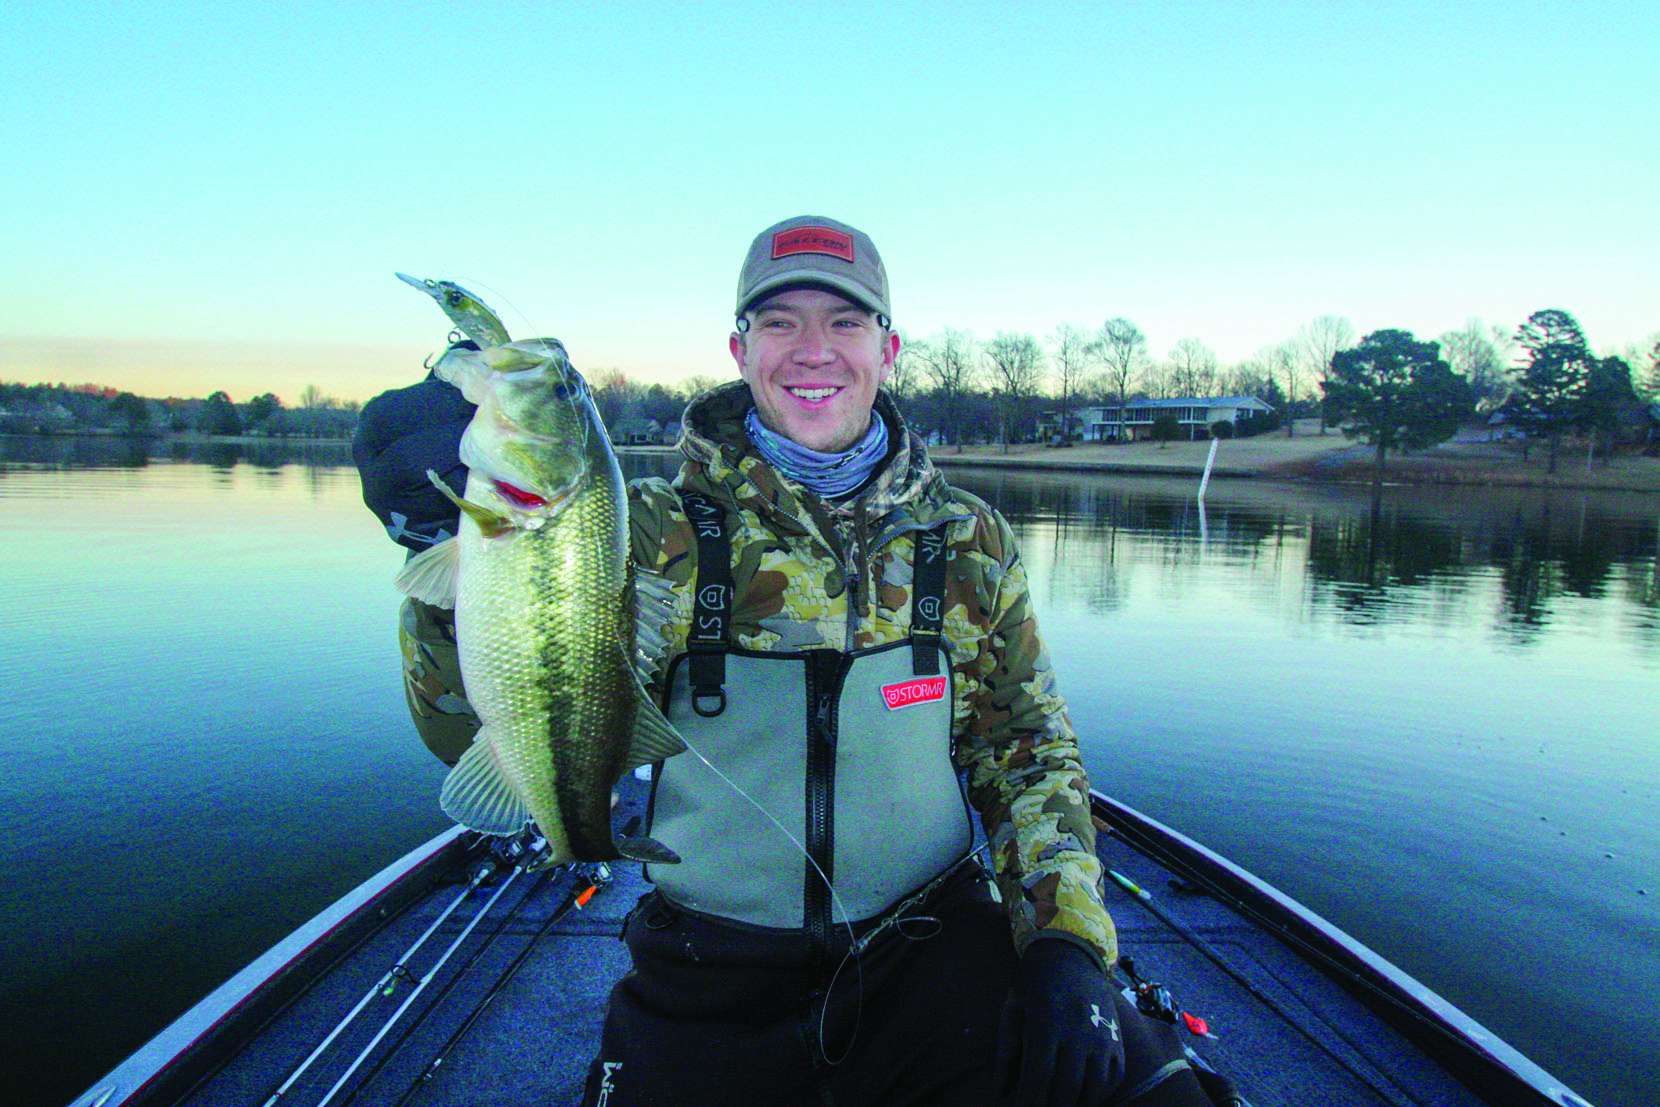 <b>7:17 a.m.</b> He switches to the jerkbait around the rockpile and bags his first keeper bass of the day, a 1-pound, 8-ounce largemouth; the tail of a shad is protruding from its mouth. “Greedy little guy! I’m seeing several fish this size down there on the Garmin. They’re 8 feet deep.” <br />
<b>7:20 a.m.</b> Back to the A-rig. He gets a tap but no hookup. “I’ve got a couple of dummy shad on there [with no hooks], and invariably those are the ones that get bit.” <br />
<b>7:26 a.m.</b> Walters casts a single Storm Largo swimbait on a 3/8-ounce head to the rockpile. <br />
<b>7:29 a.m.</b> He tries the DT06 on the rockpile. <br />
<b>7:31 a.m.</b> Walters catches keeper No. 2, 1 pound, off the rockpile on the Whipper Snapper.<br />
” class=”wp-image-568516″ width=”1660″ height=”1107″/><figcaption><b>7:17 a.m.</b> He switches to the jerkbait around the rockpile and bags his first keeper bass of the day, a 1-pound, 8-ounce largemouth; the tail of a shad is protruding from its mouth. “Greedy little guy! I’m seeing several fish this size down there on the Garmin. They’re 8 feet deep.” <br />
<b>7:20 a.m.</b> Back to the A-rig. He gets a tap but no hookup. “I’ve got a couple of dummy shad on there [with no hooks], and invariably those are the ones that get bit.” <br />
<b>7:26 a.m.</b> Walters casts a single Storm Largo swimbait on a 3/8-ounce head to the rockpile. <br />
<b>7:29 a.m.</b> He tries the DT06 on the rockpile. <br />
<b>7:31 a.m.</b> Walters catches keeper No. 2, 1 pound, off the rockpile on the Whipper Snapper.<br />
</figcaption></figure>
<figure class=